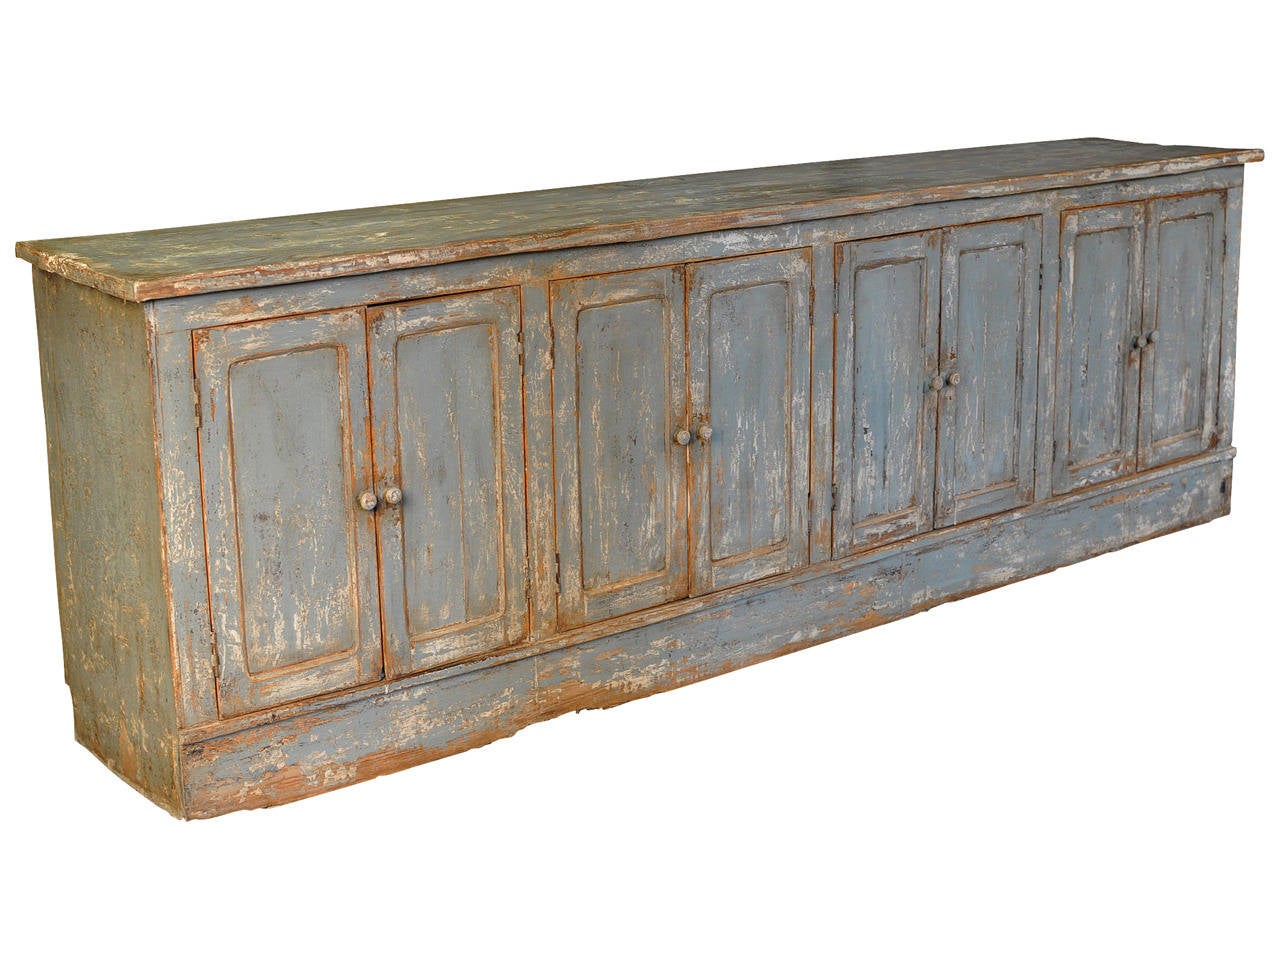 A charming mid 19th century Portuguese painted store counter enfilade.  This wonderful piece is finished on all sides.  An excellent storage piece with four double doors and interior shelving.  This long enfilade can be used as a buffet, an island